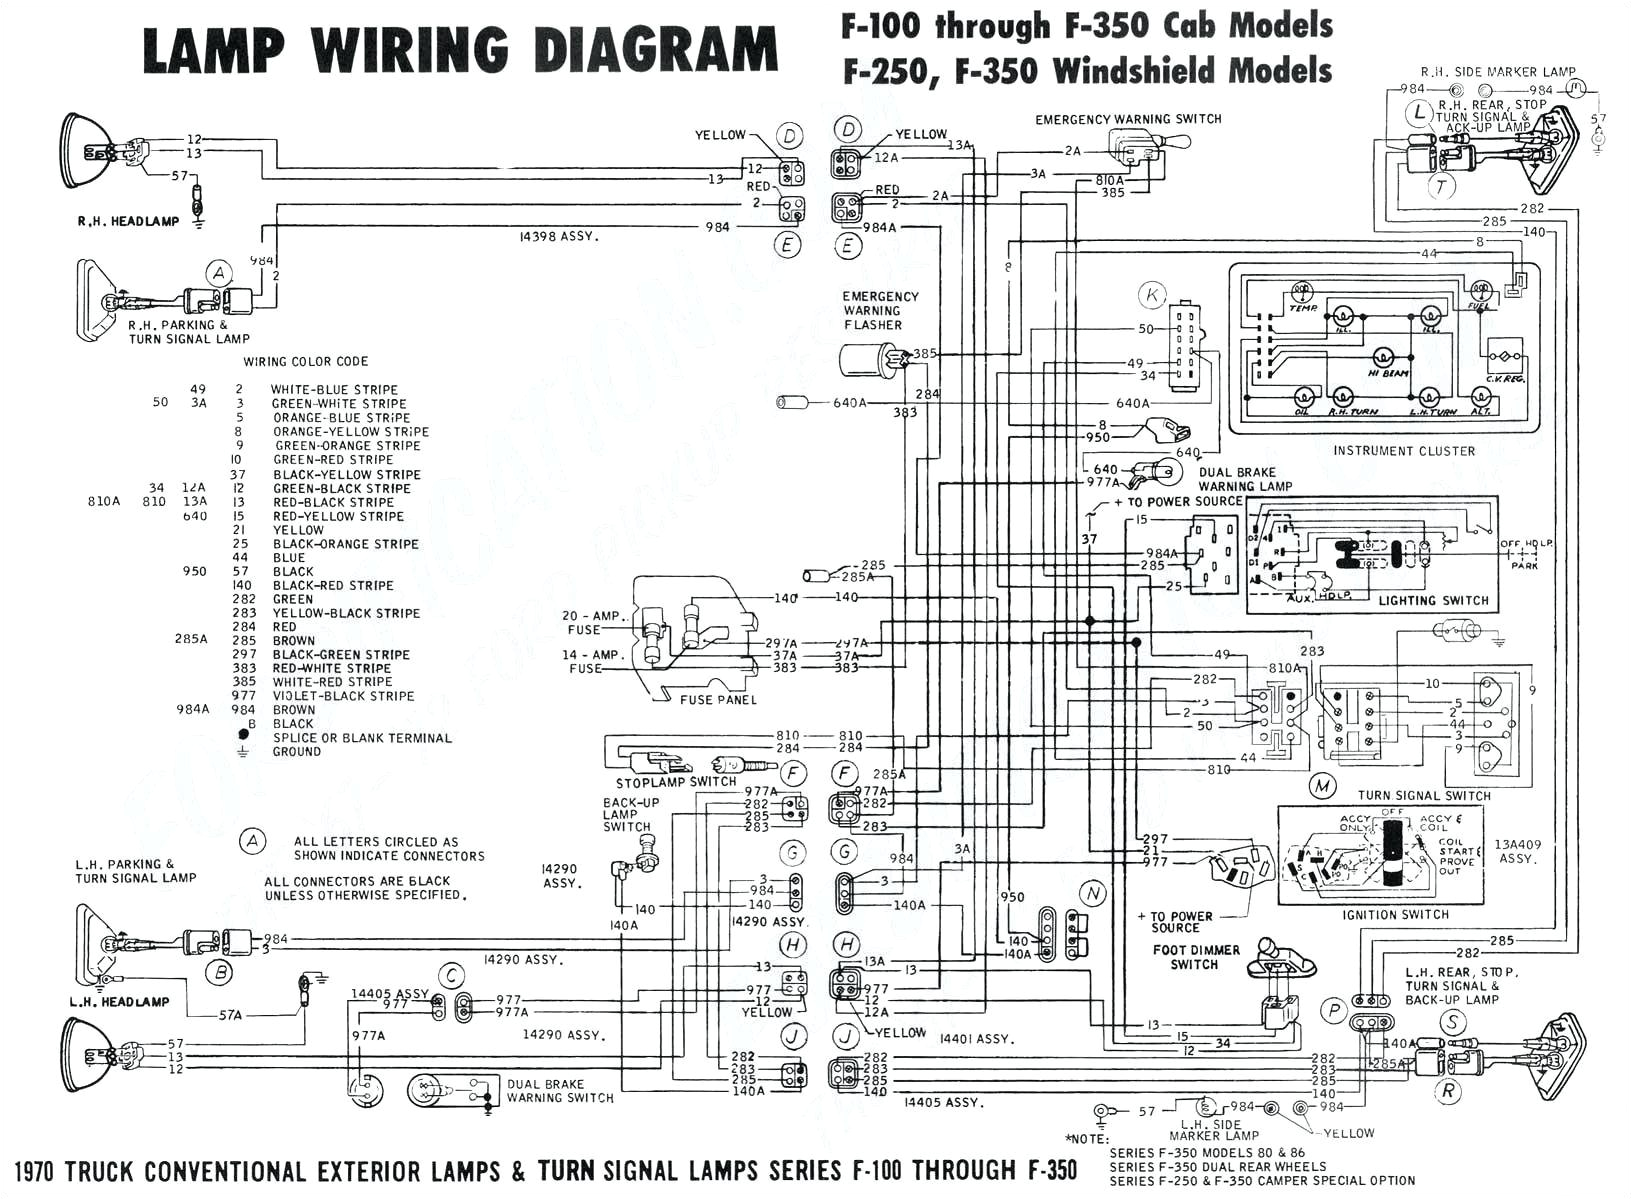 tail light wiring diagram ford f150 wiring diagram for automotive lights new stop turn tail light wiring diagram beautiful 1979 ford f150 17r jpg